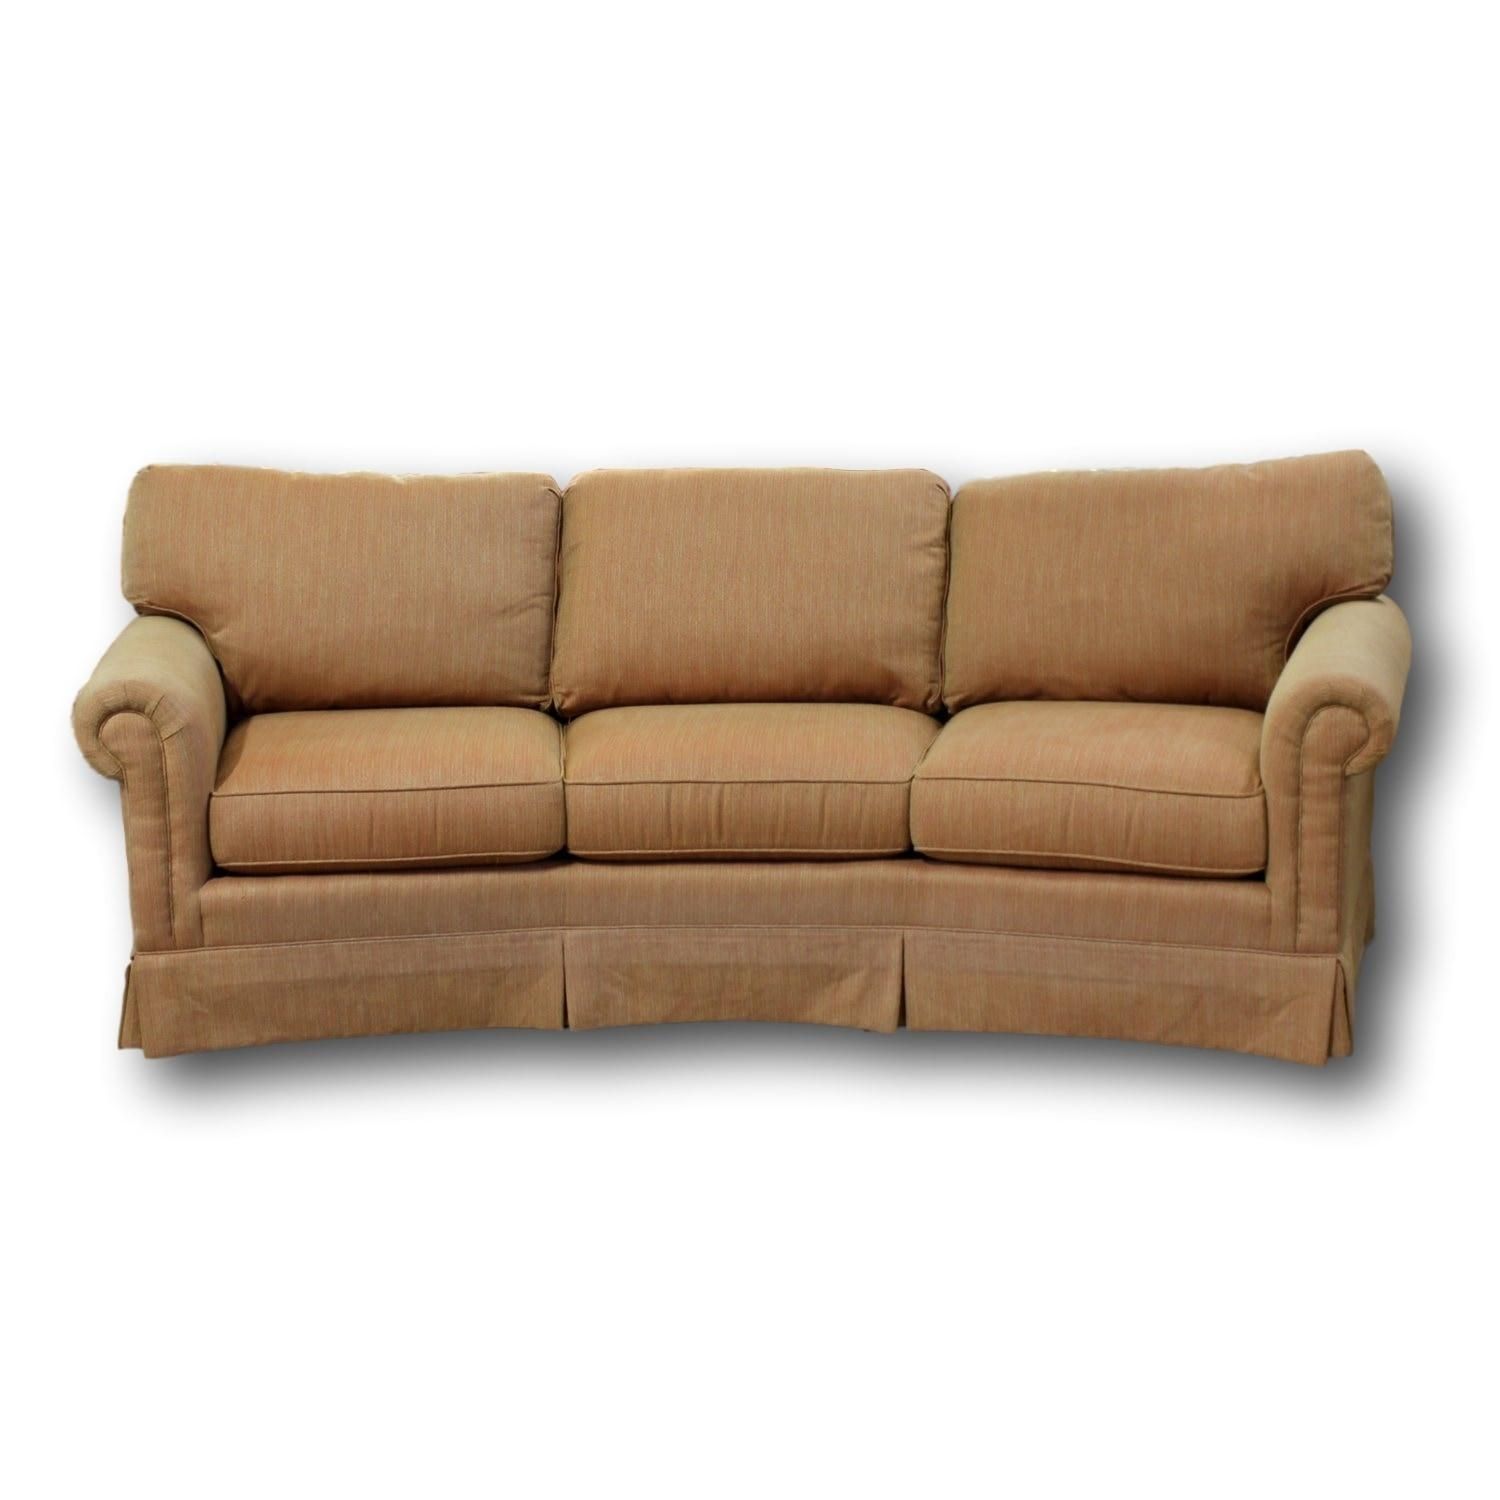 Sofas Center : Clayton Marcus Sofa And Loveseat Covers Setsclayton Intended For Clayton Marcus Sofas (View 17 of 20)